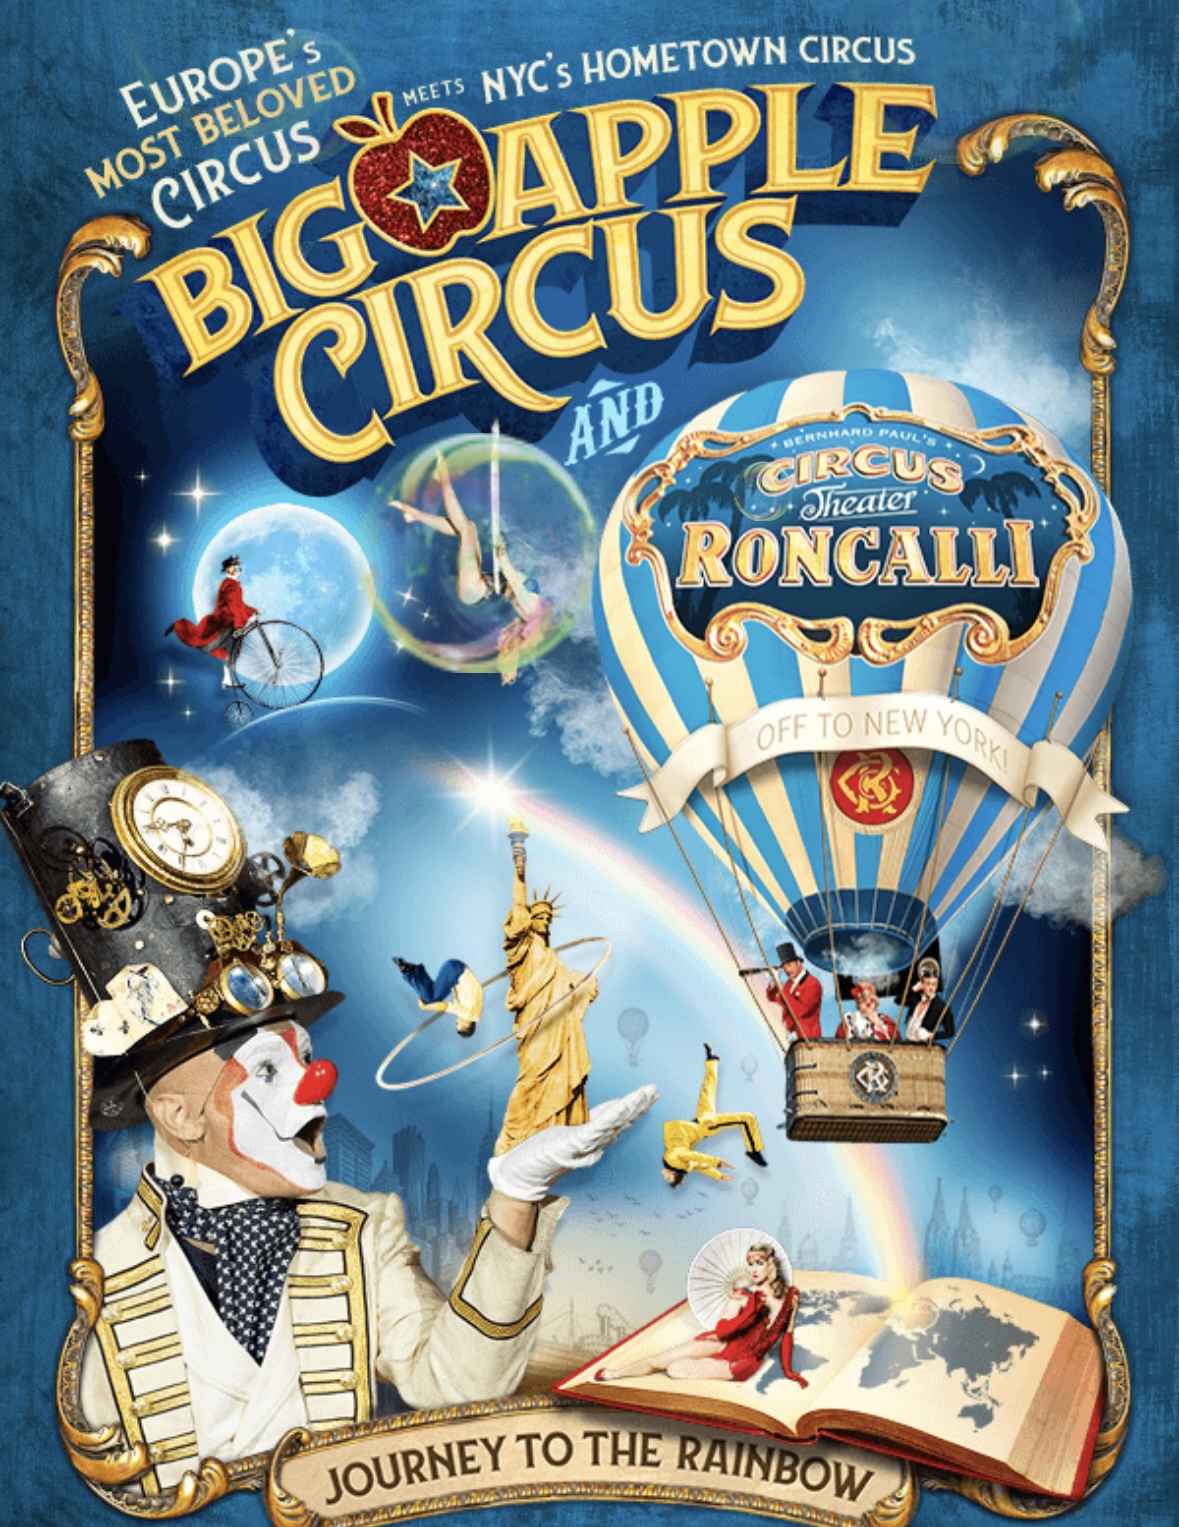 The Celebrated Big Apple Circus: "Journey to the Rainbow" Arrives November 8, 2023